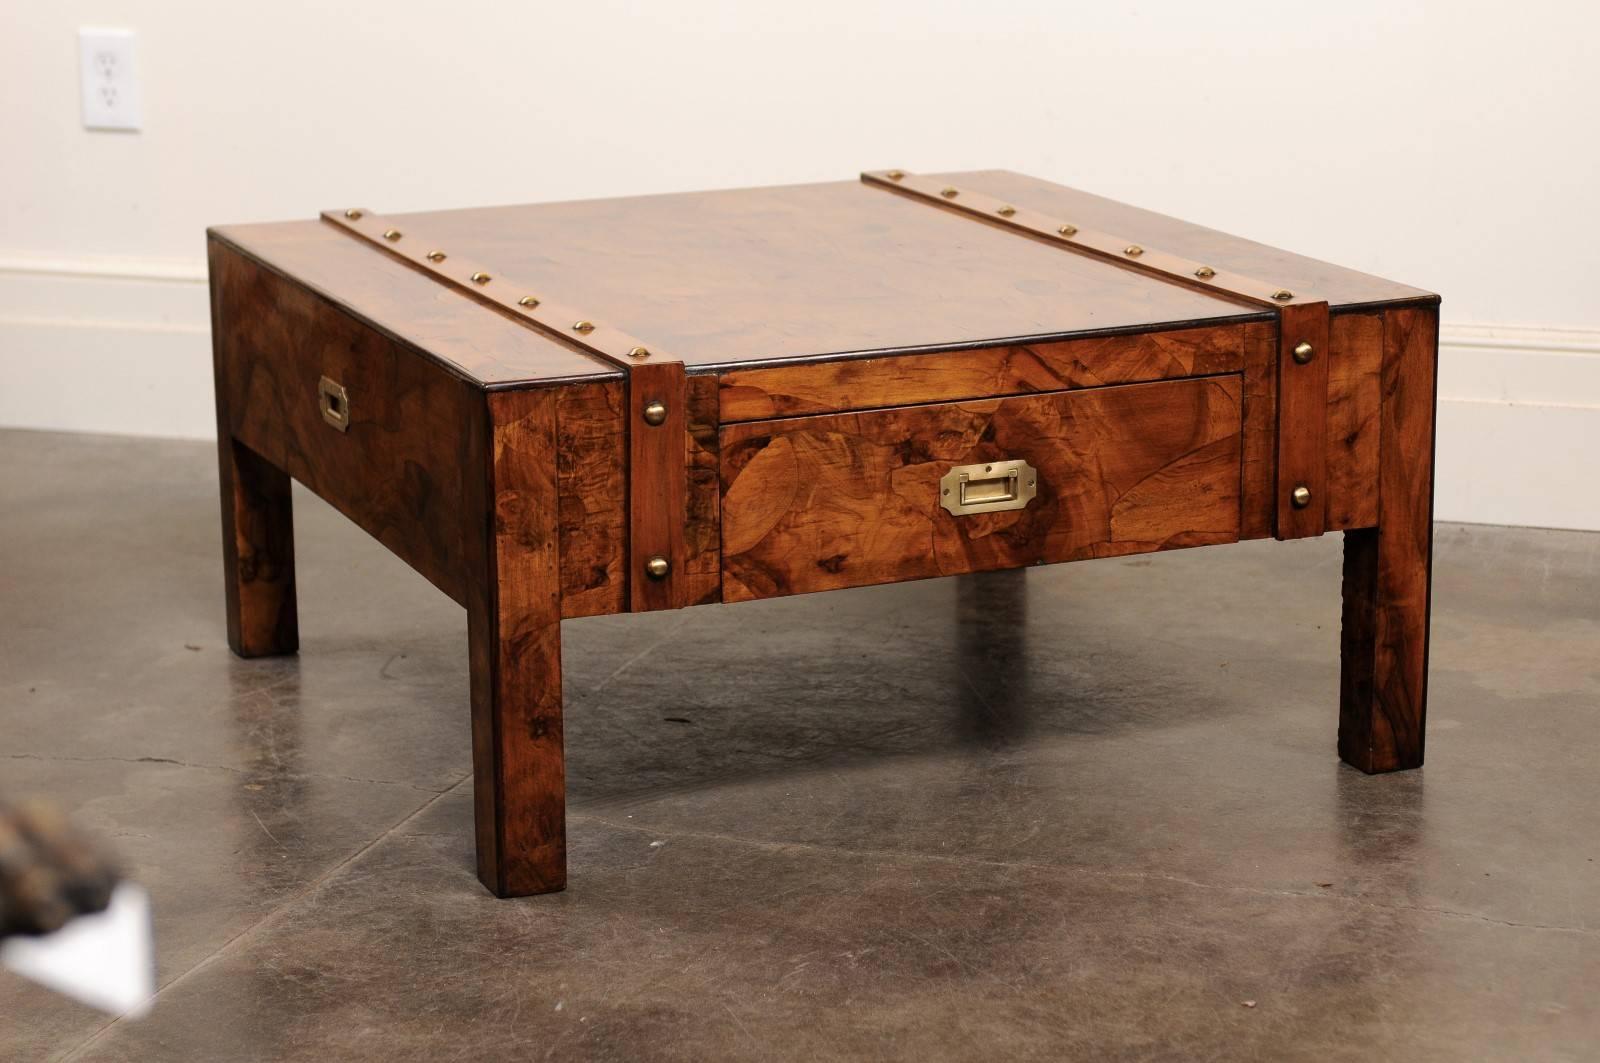 This English Campaign coffee table from the mid-20th century features an exquisite burled wood top over a single drawer. The top is adorned with two wooden bands with brass nailheads, reminiscent of the leather straps of a trunk or suitcase. The